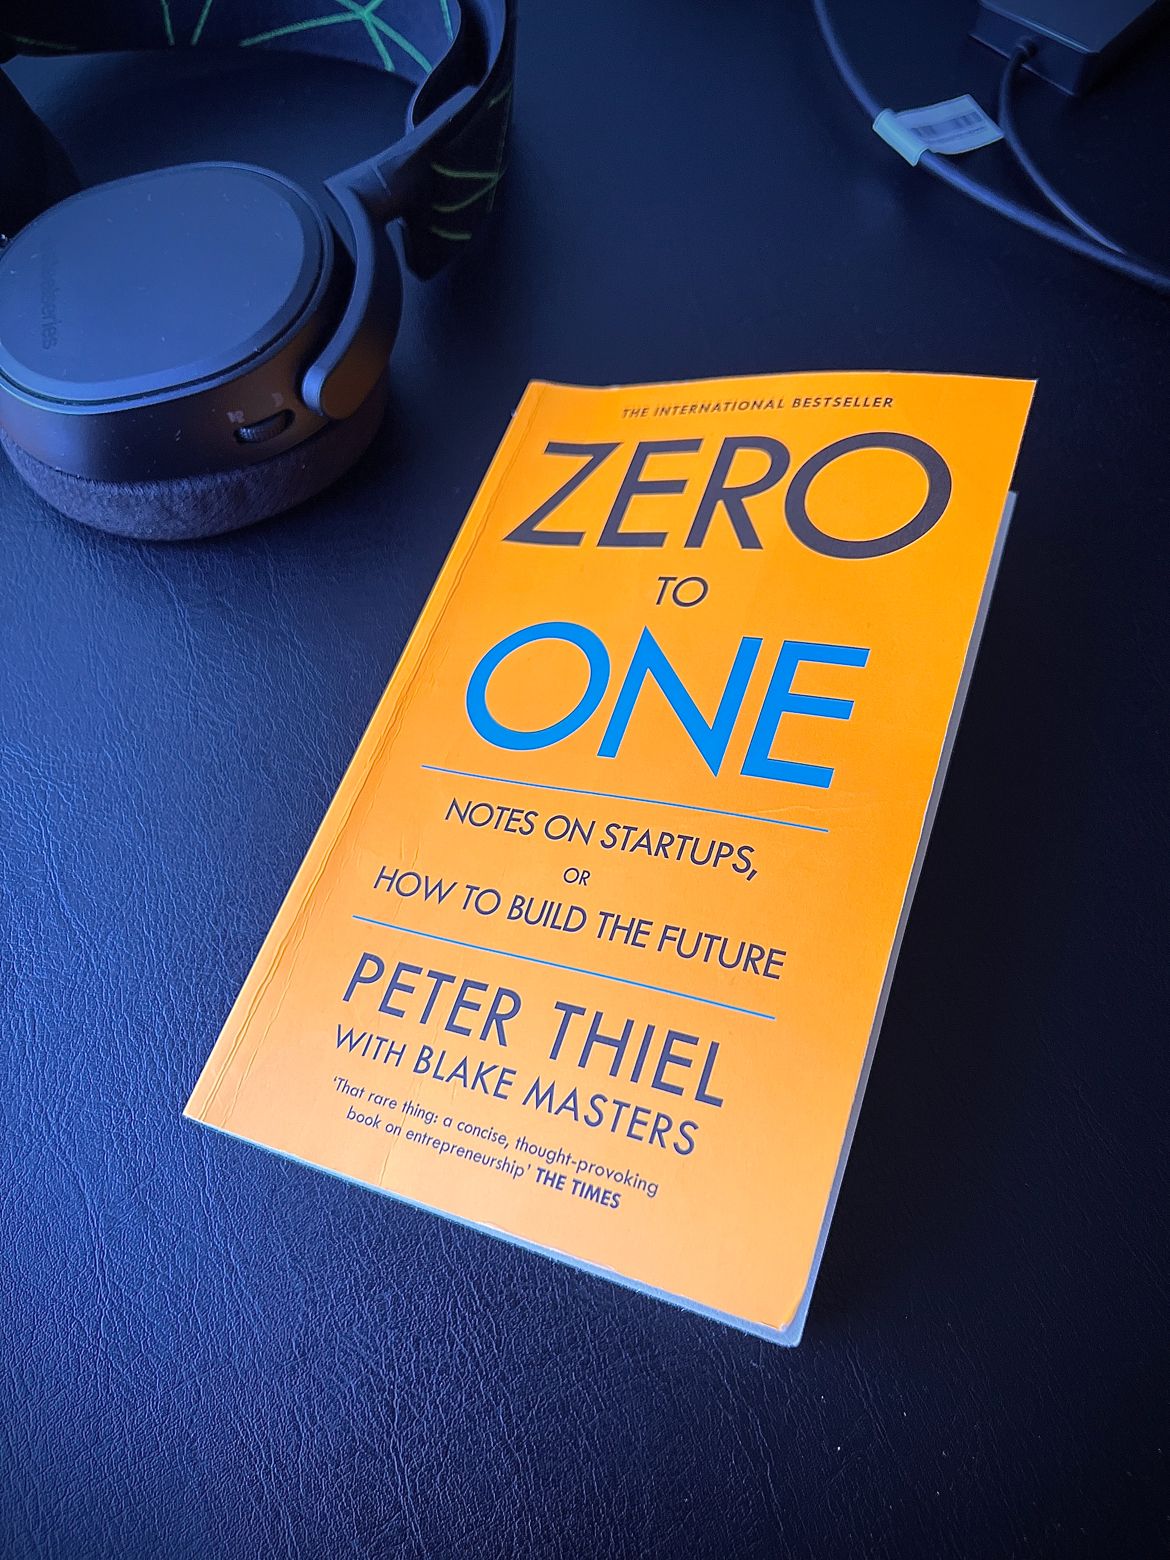 Innovation Thoughts on Zero to One by Peter Thiel